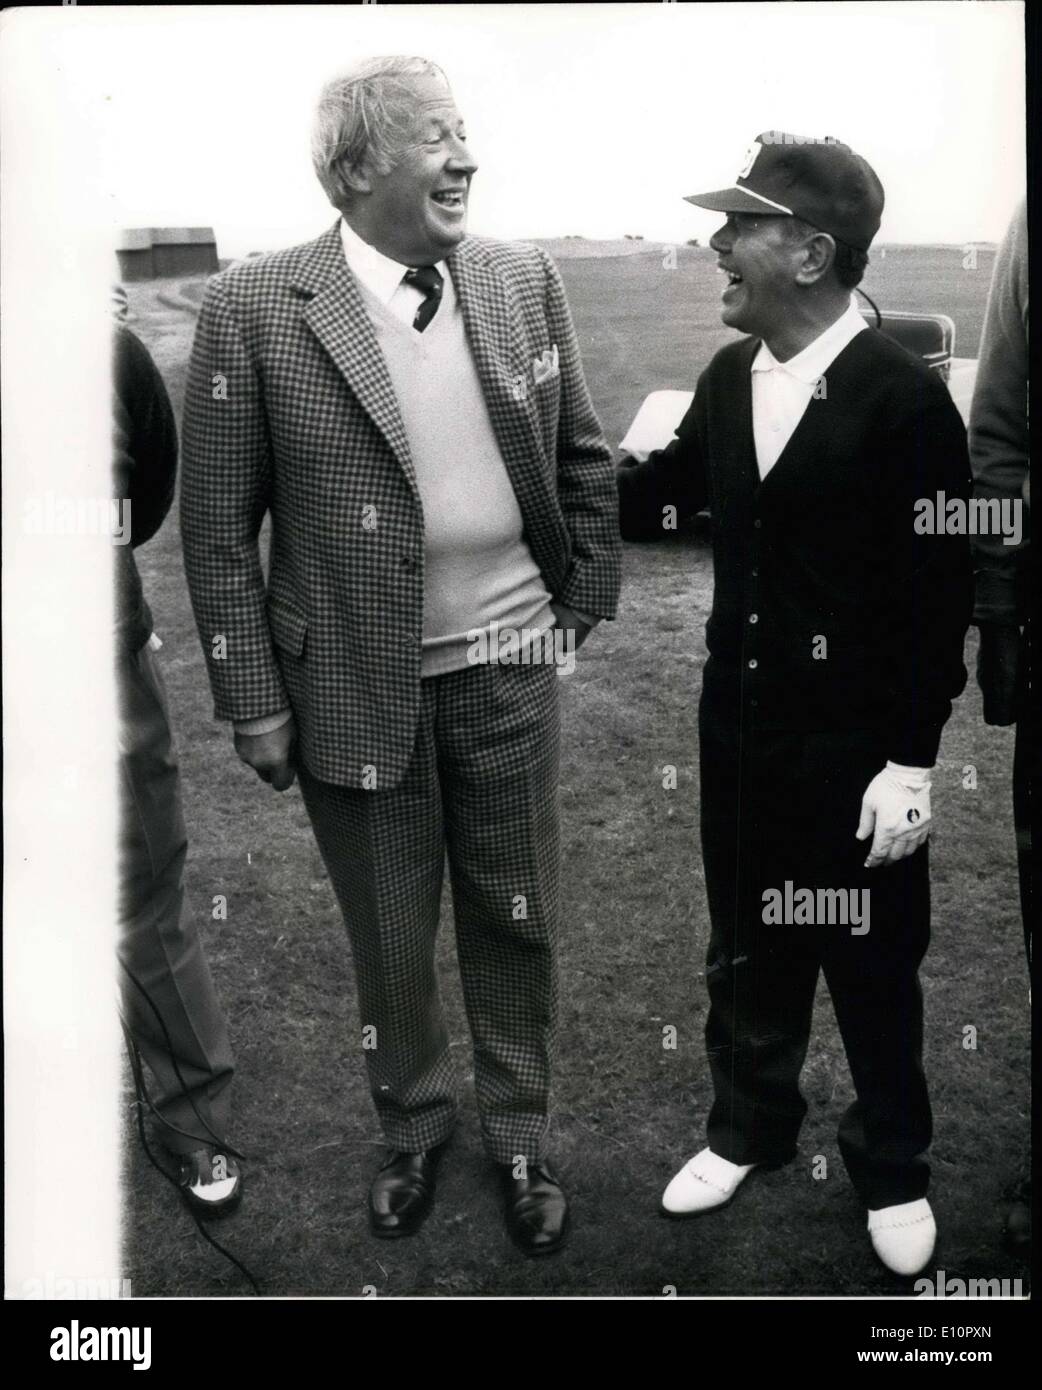 Sep. 30, 1973 - Japanese Prime Minister Plays Golf With Mr. Whitelaw At Sandwich Kent: The Japanese Prime Minister Mr. Kakuki Tanaka, who arrived in London yesterday, for a four day visit was at the Royal St George golf course this morning for a nine hole round of golf, his partner was Mr. William Whitelaw. Secretary of Northern Ireland, and their opponents were Mr. Mori, the Japanese Ambassador, and a past St. George's Capt, and Walker Cup Capt G.A. Hill. During the games The British Prime Minister Mr Stock Photo